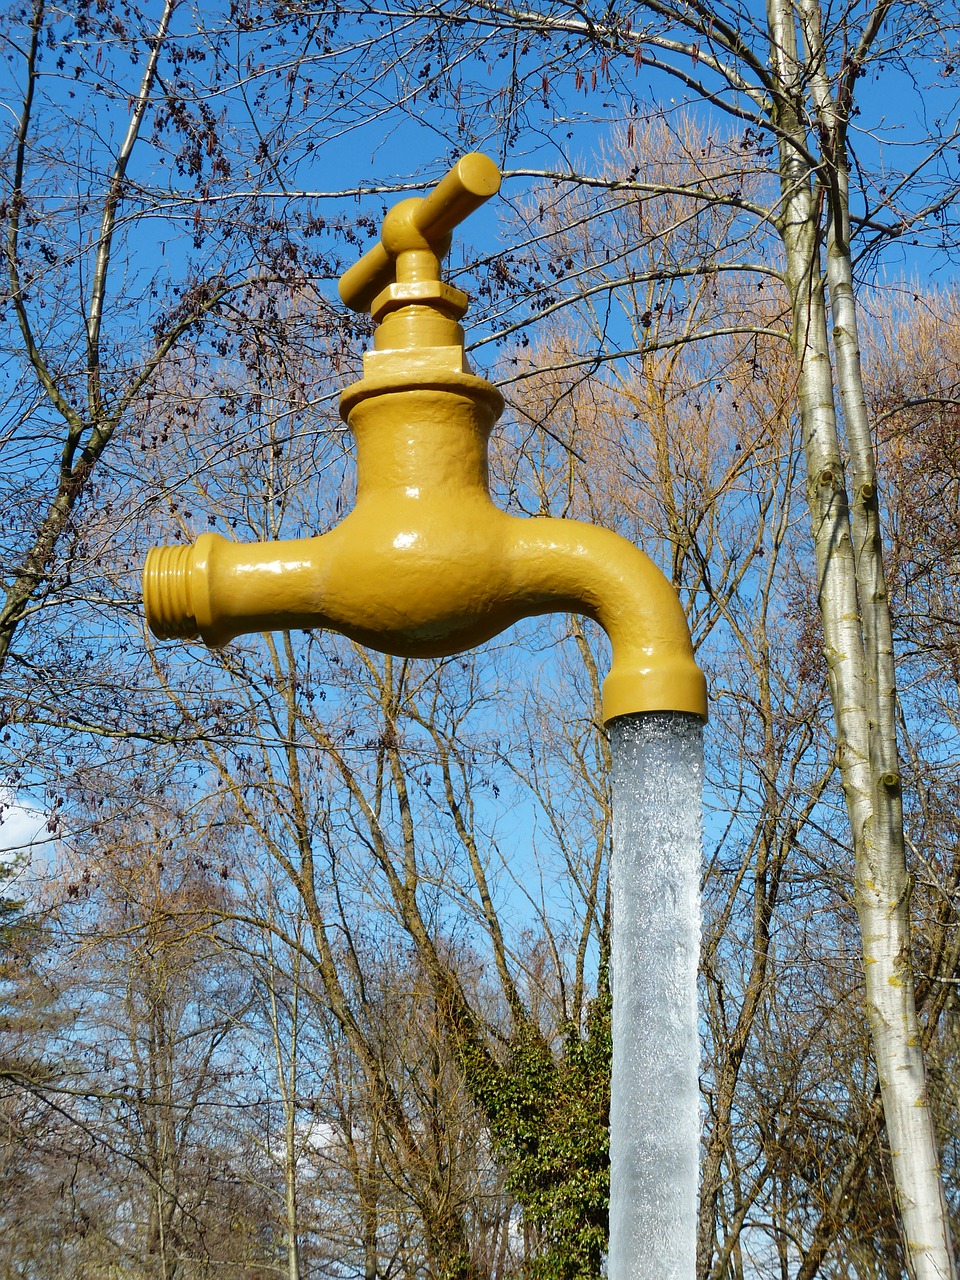 faucet water column free standing free photo